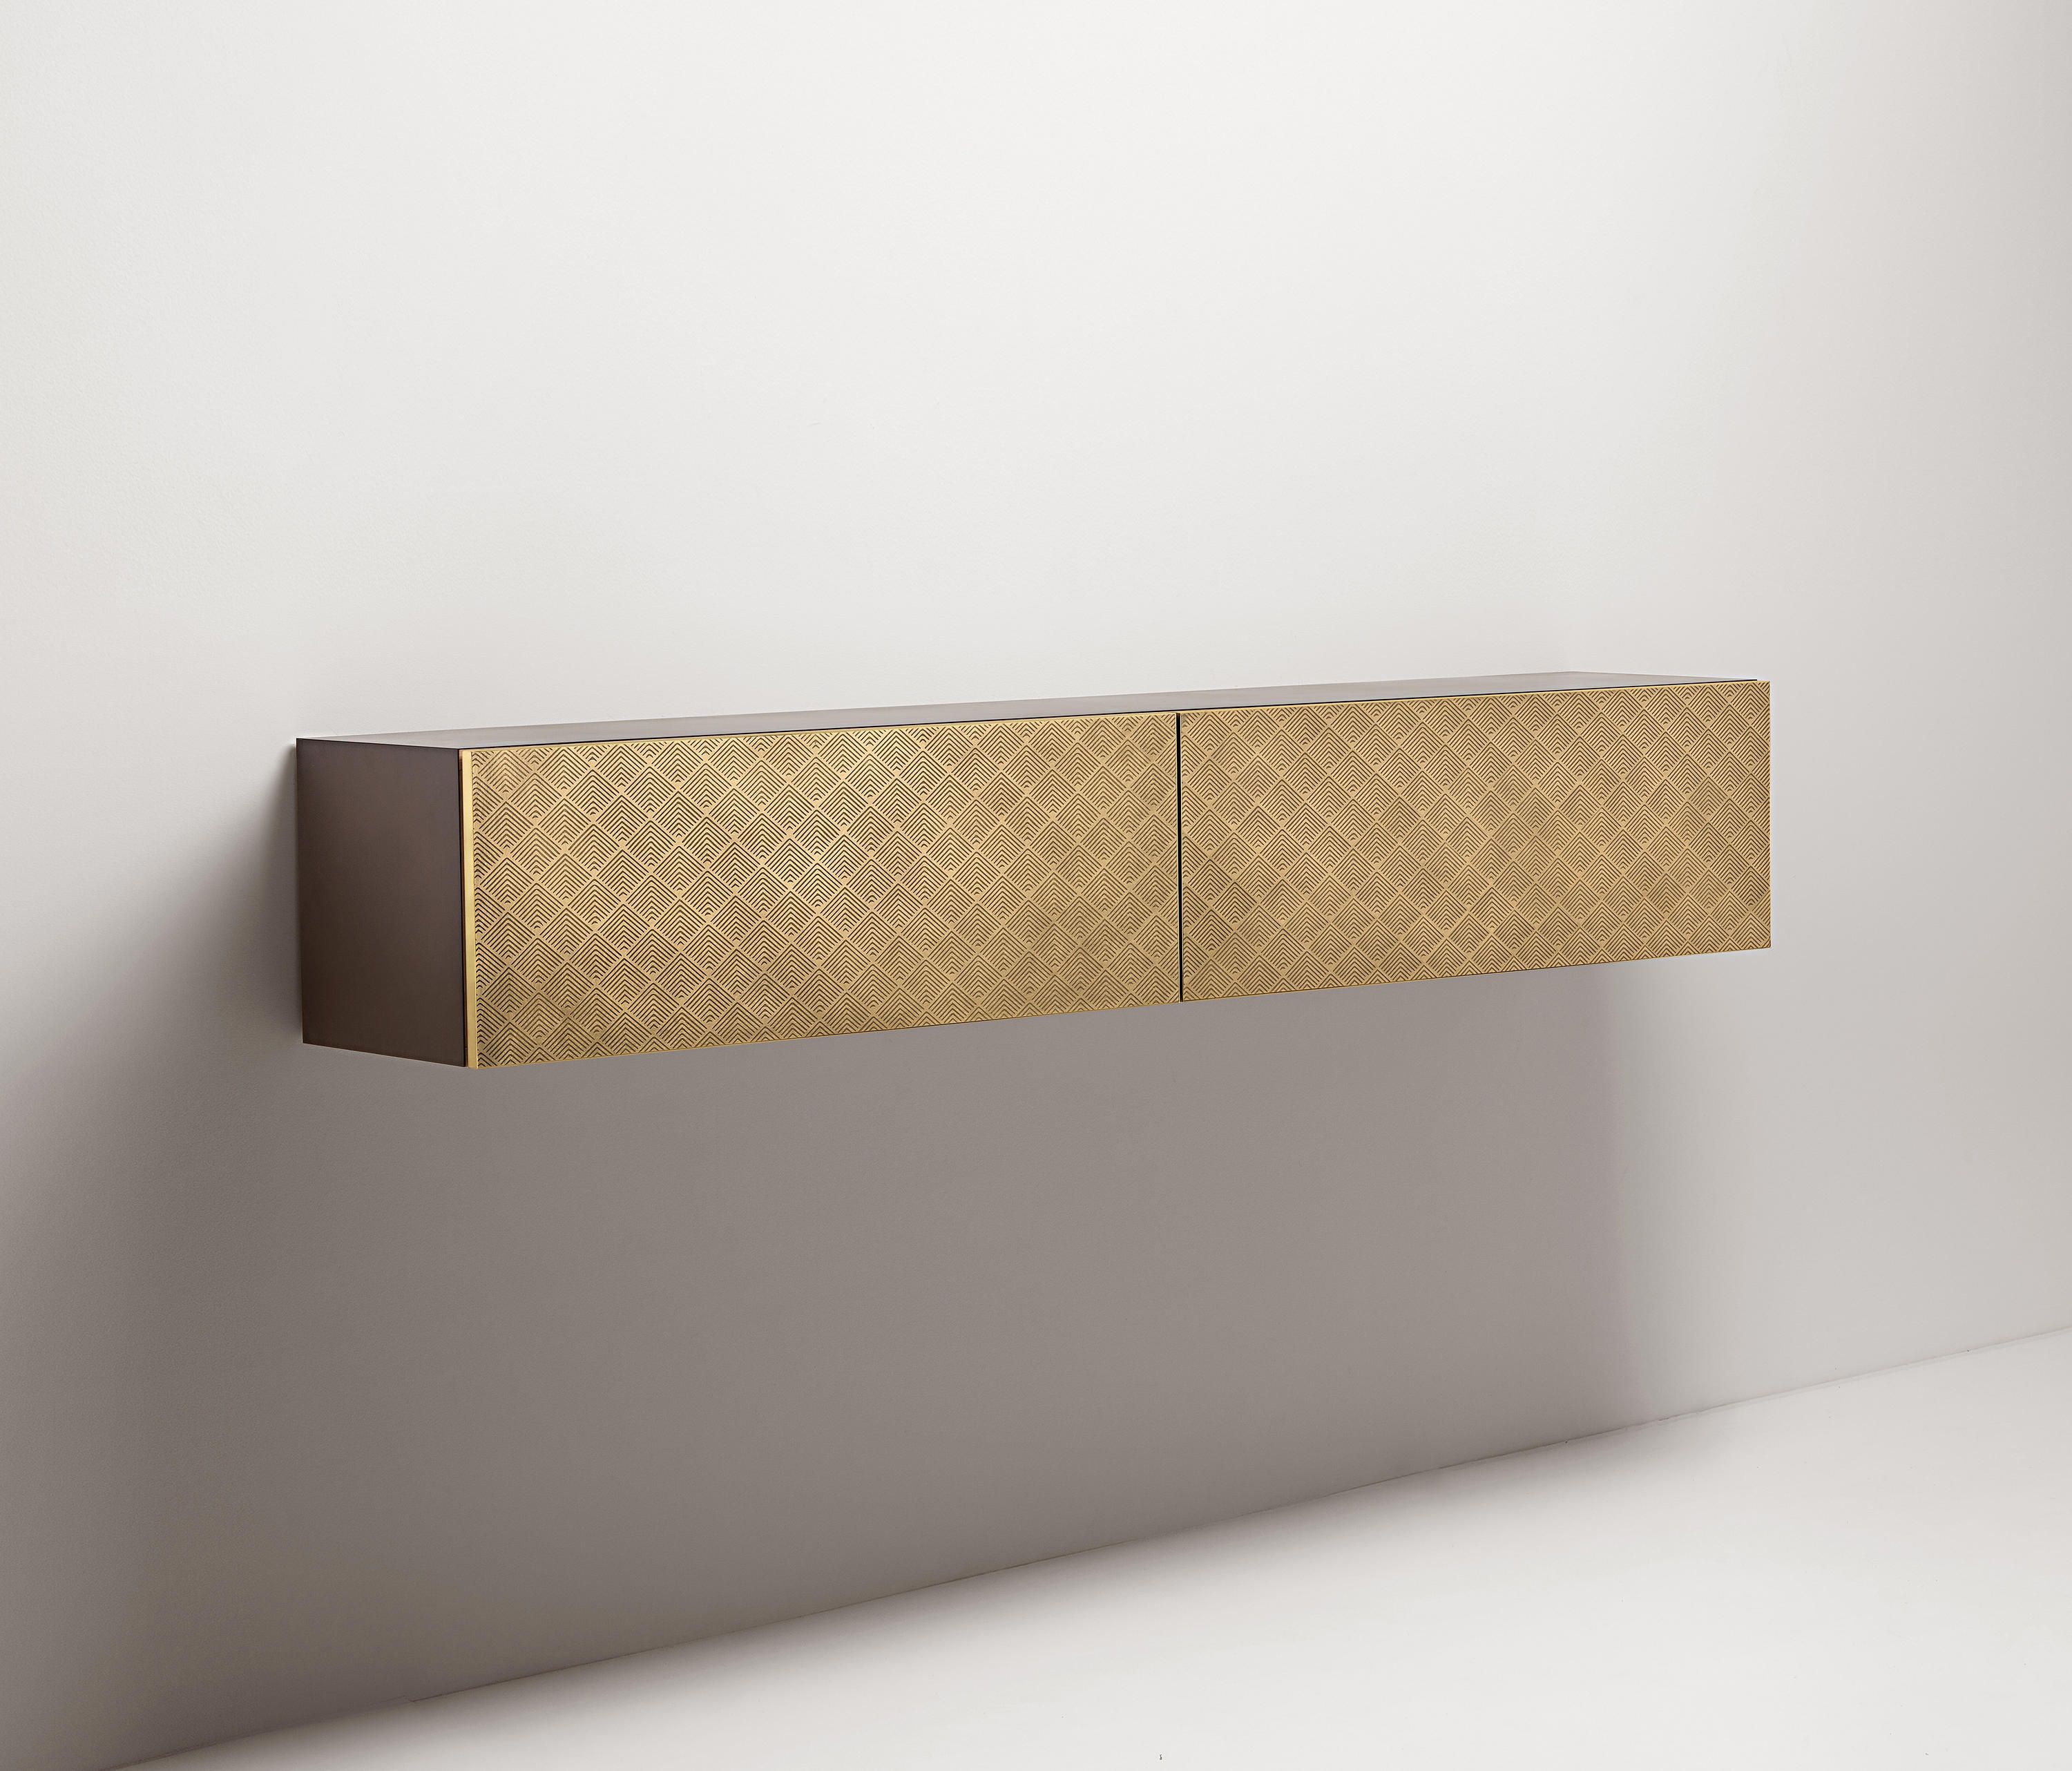 Tako – Sideboards From De Castelli | Architonic In Castelli Sideboards (View 13 of 30)